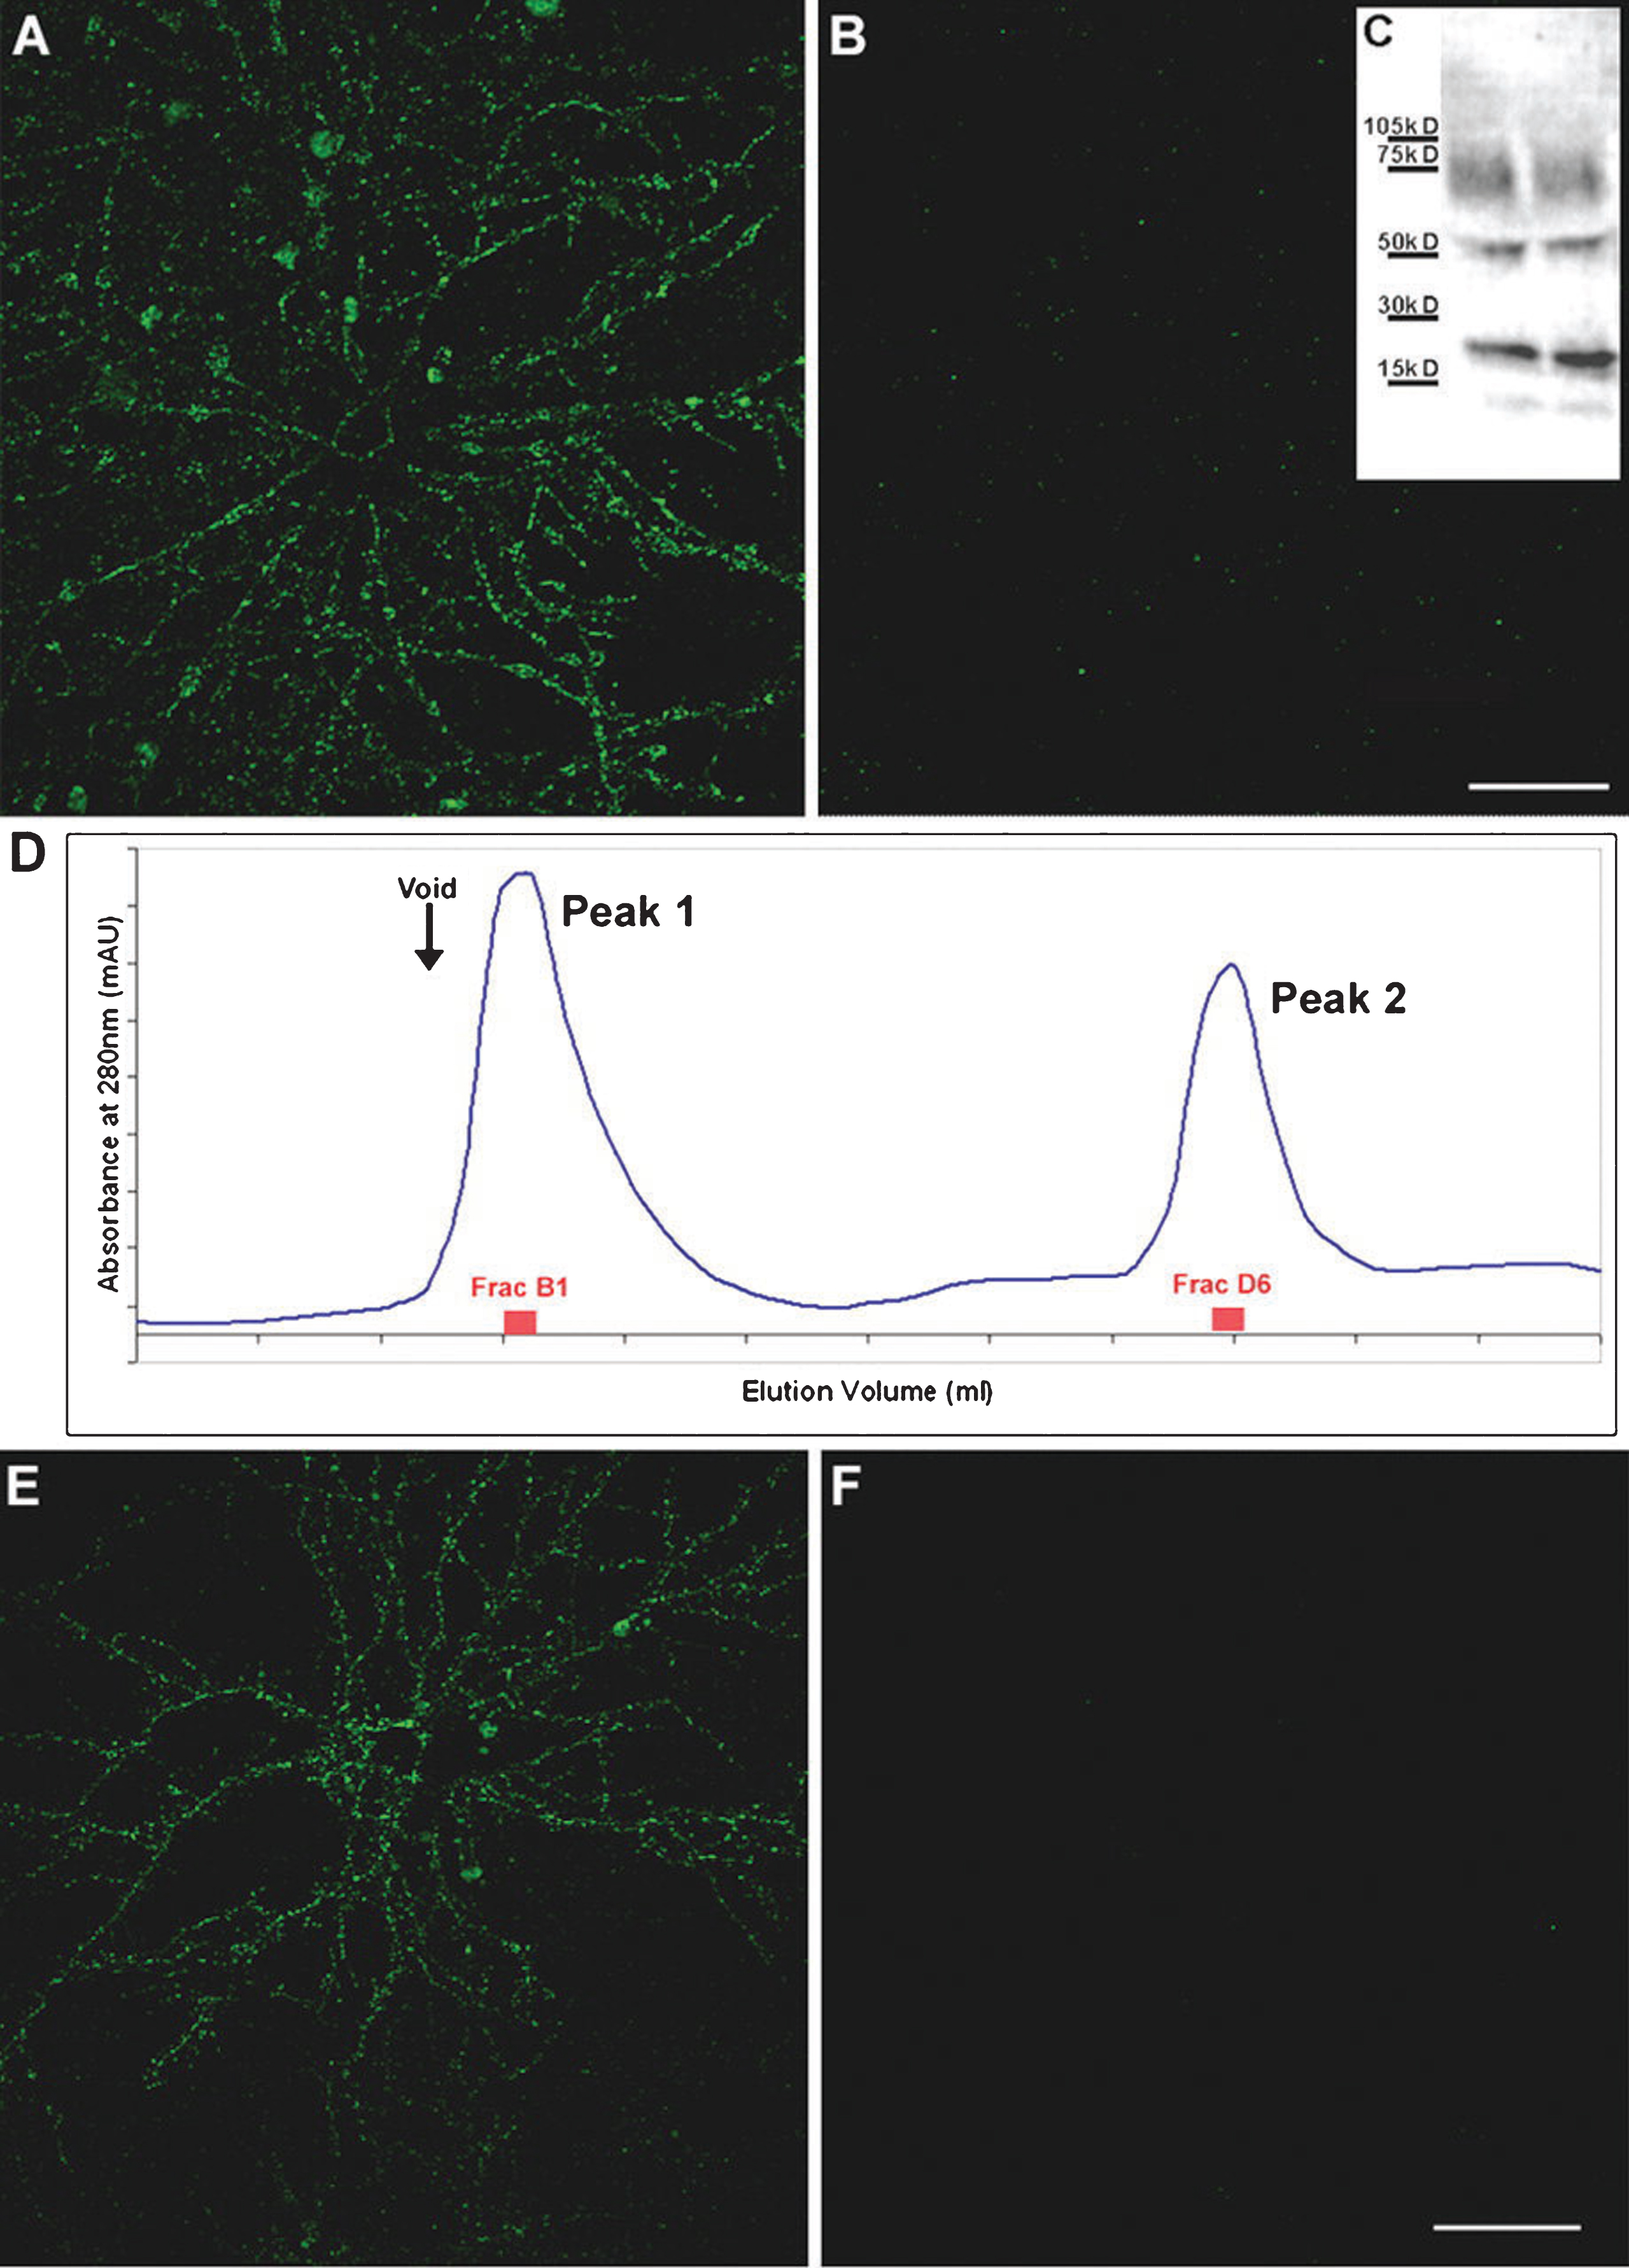 Only high-molecular weight AβOs are capable of binding cultured hippocampal neurons. Synthetic AβOs were divided into high and low molecular weight populations using 50 kDa molecular weight cutoff ultrafiltration (A-B) or size exclusion chromatography (D-F) and incubated with cultured hippocampal neurons. Only high-molecular weight AβOs bind neurons (A, E); no binding of low-molecular weight AβOs was evident (B, F). Scale bar = 40μm. Reprinted from “Synaptic targeting by Alzheimer’s-related amyloid beta oligomers” by Lacor PN, Buniel MC, Chang L, Fernandez SJ, Gong Y, Viola KL, Lambert MP, Velasco PT, Bigio EH, Finch CE, Krafft GA, and Klein WL. This was published in J Neurosci, 2004, 24(45): 10191-10200, copyright 2004; permission conveyed through Copyright Clearance Center, Inc. [16].